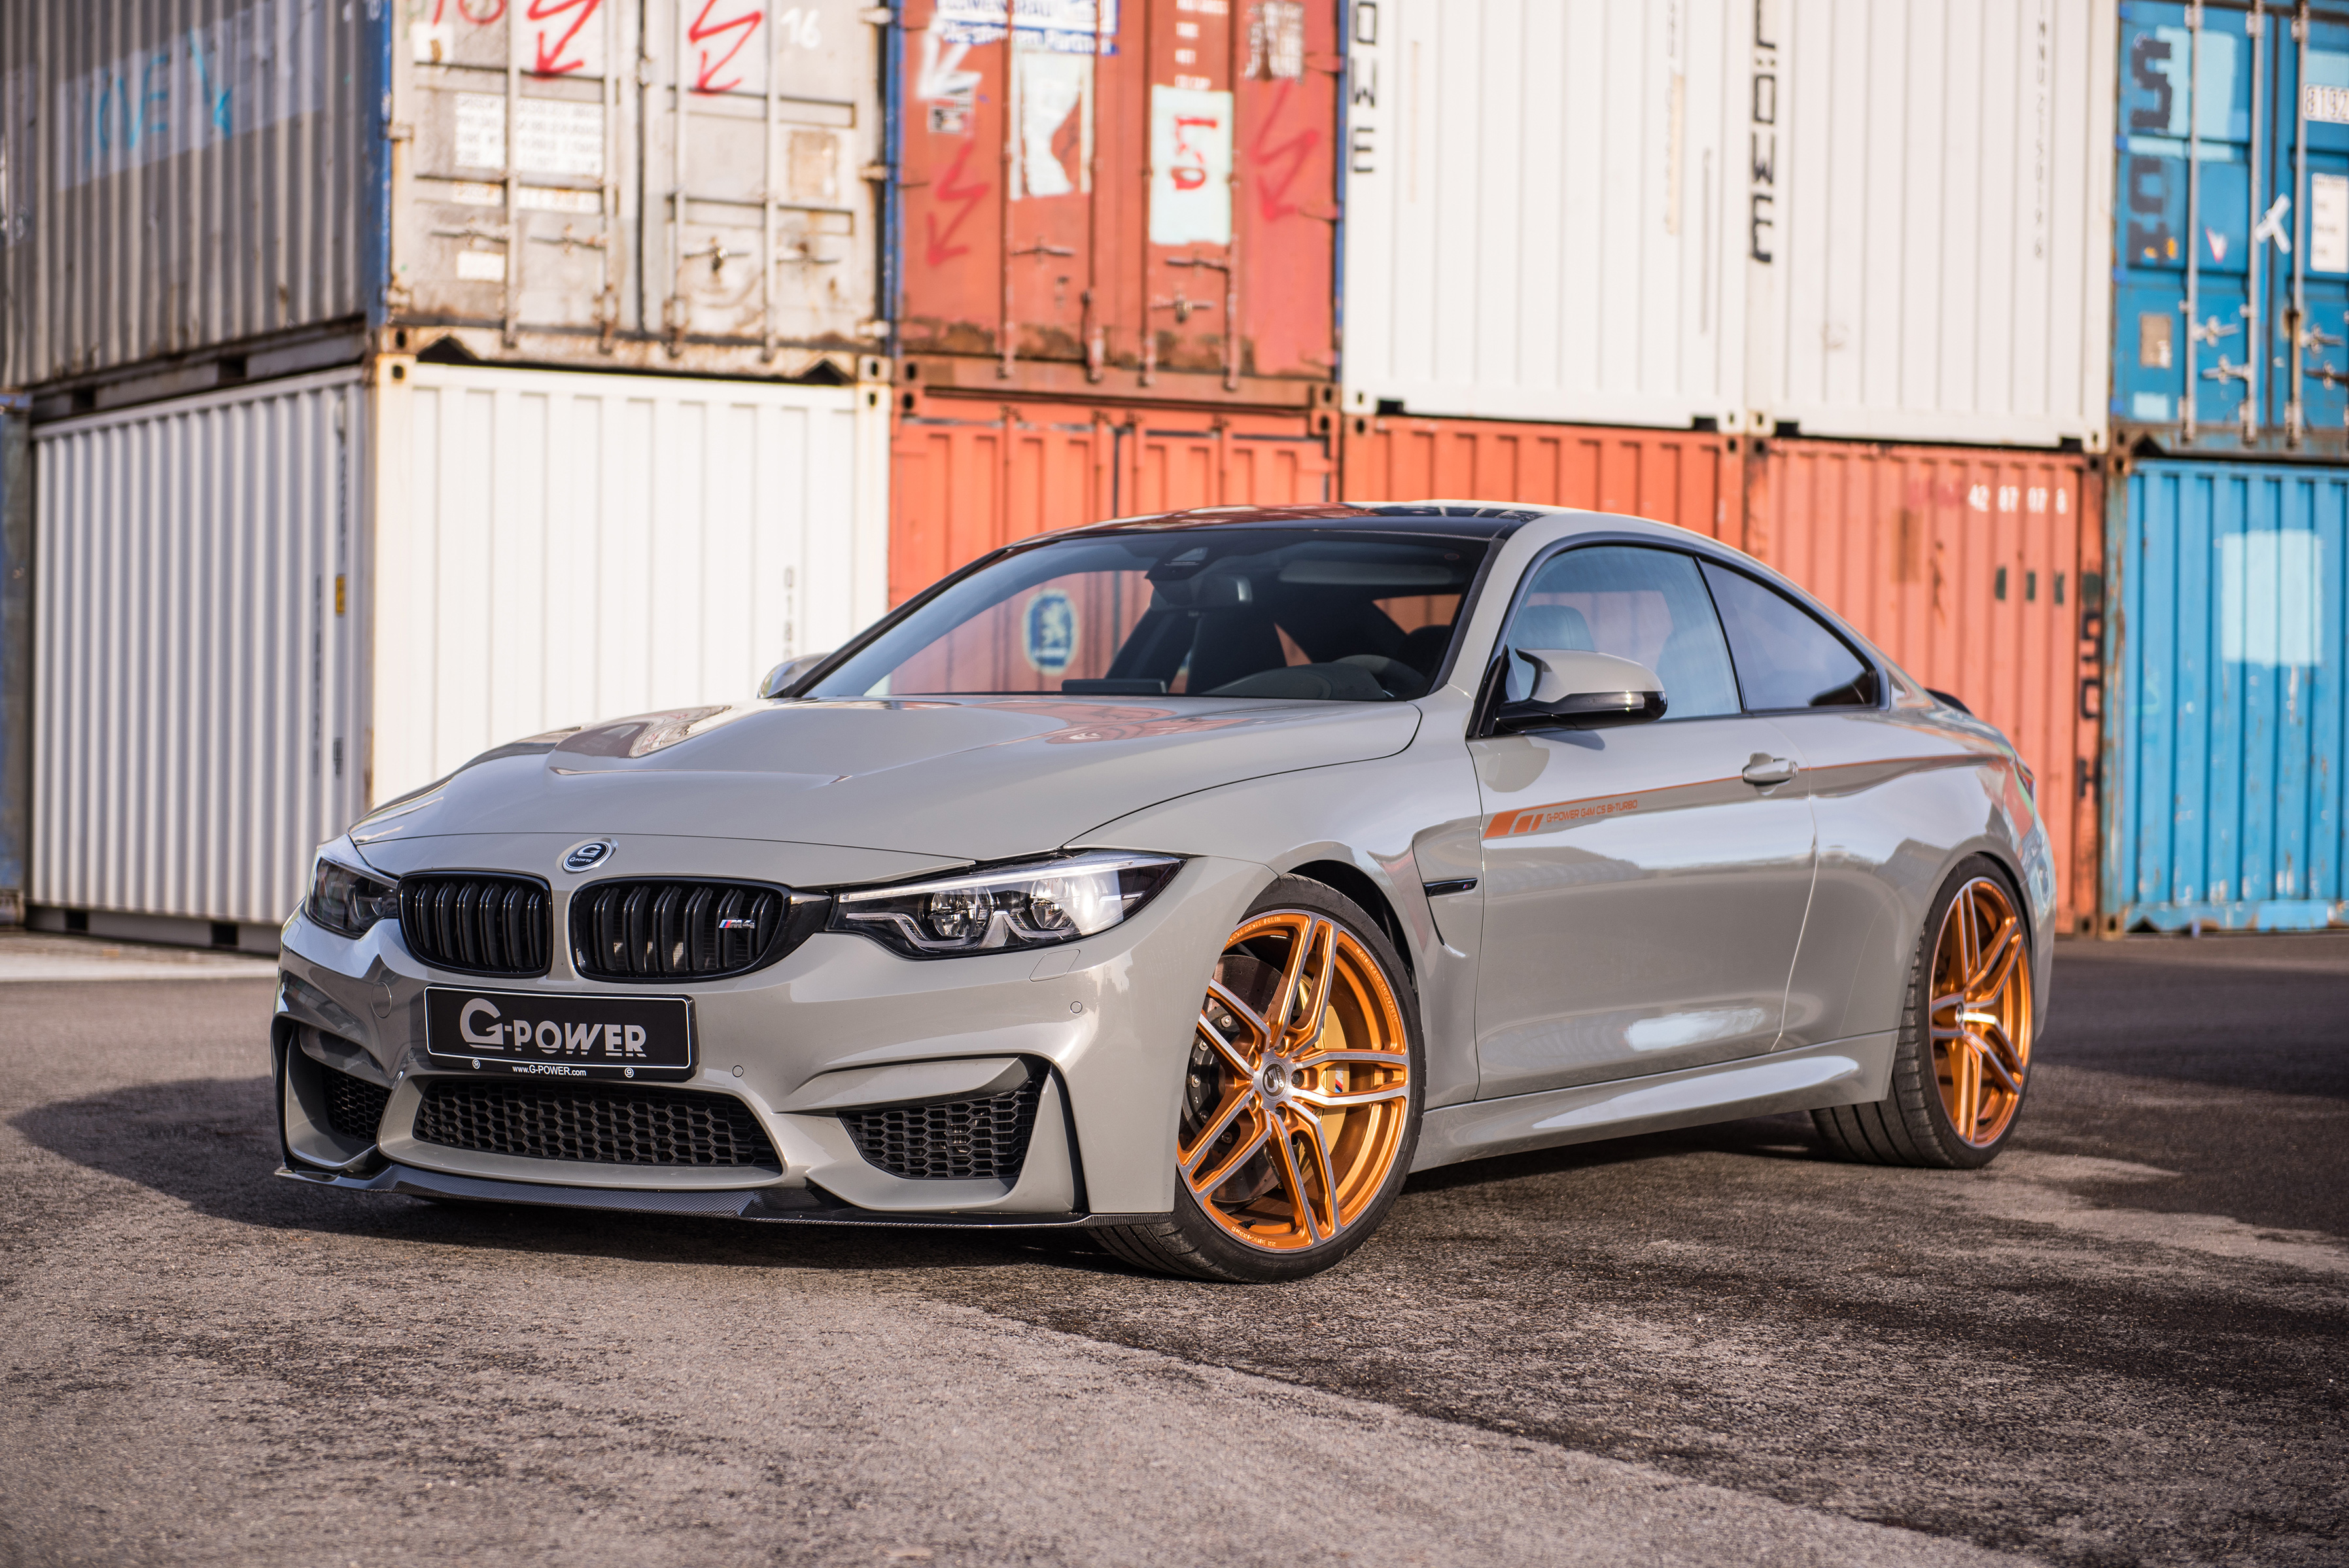 G Power BMW M4 CS 2018, HD Cars, 4k Wallpapers, Images, Backgrounds